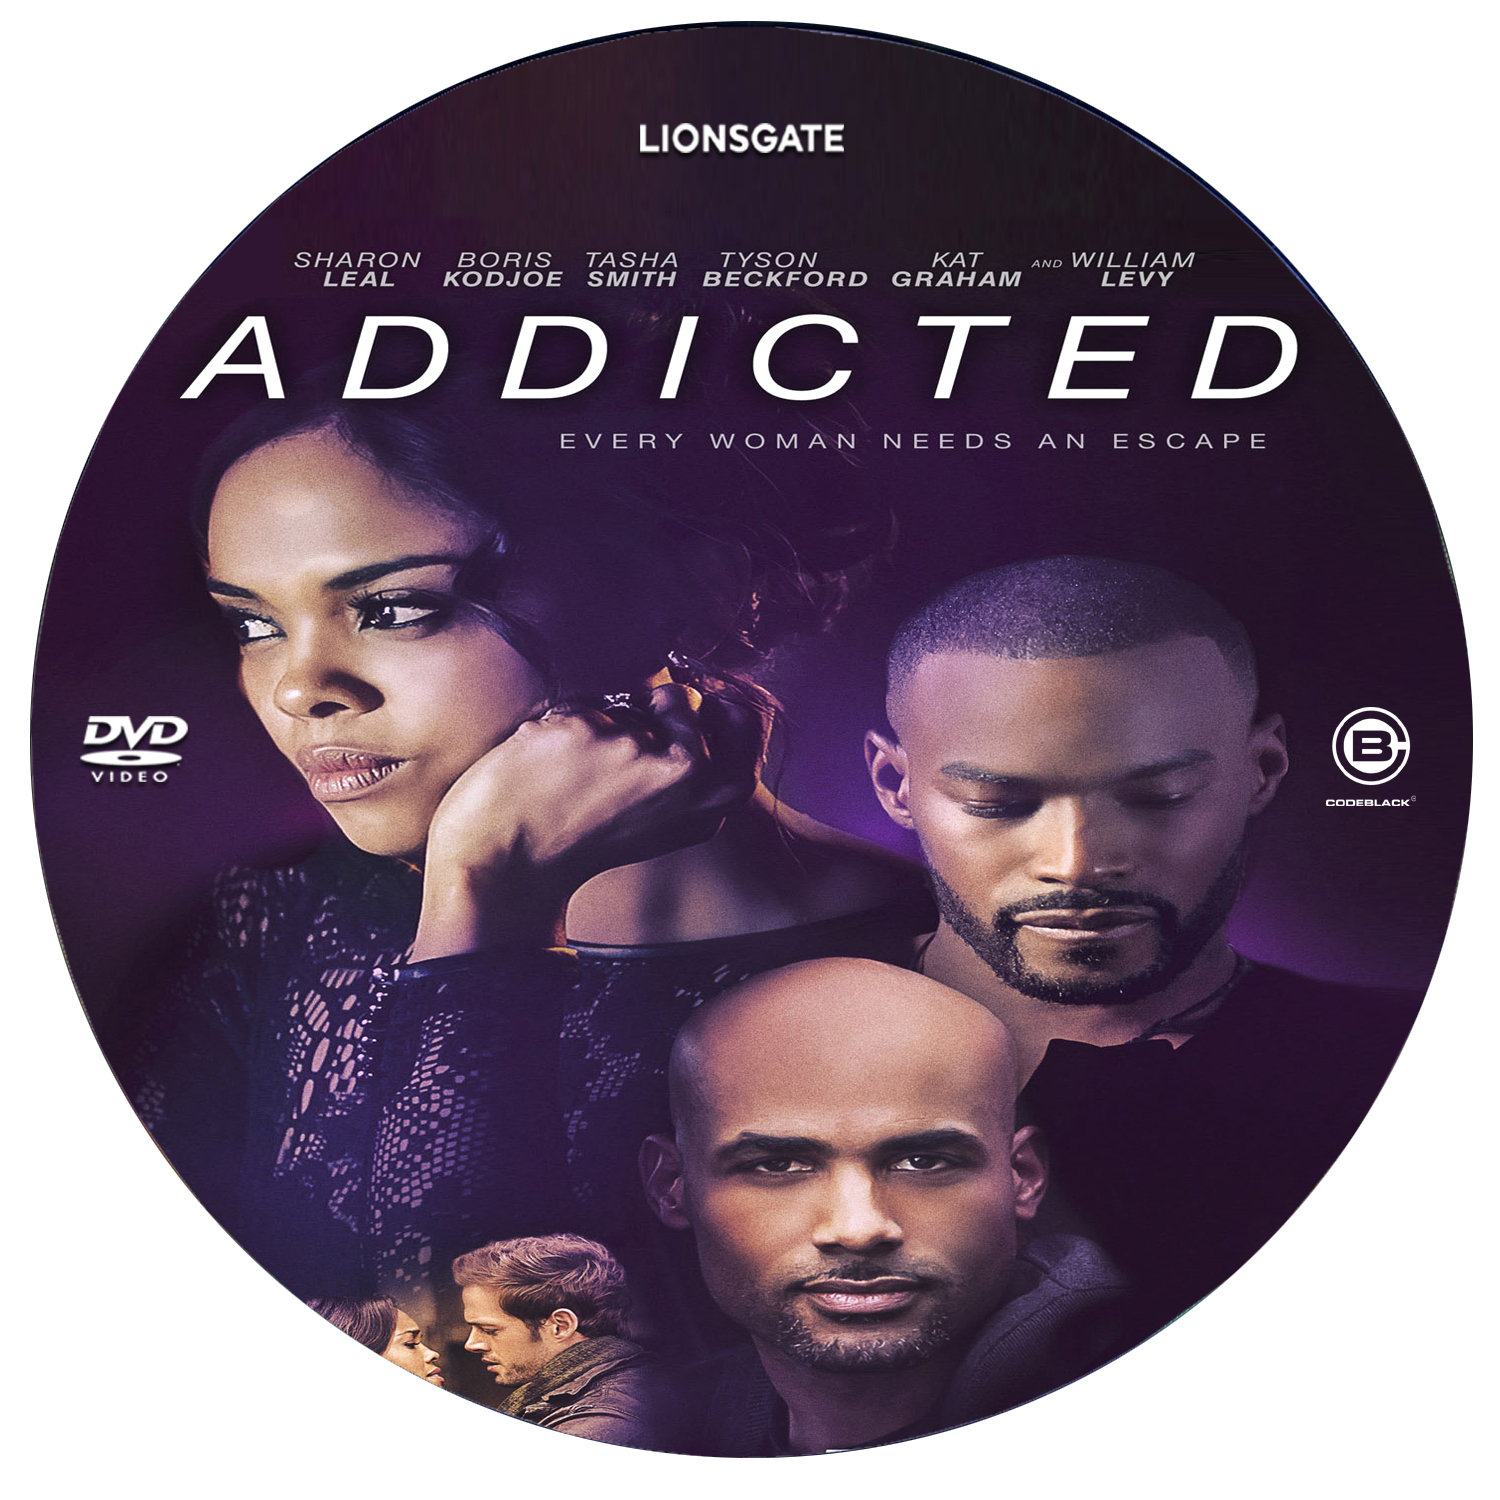 britney ruffin share addicted full movie download photos